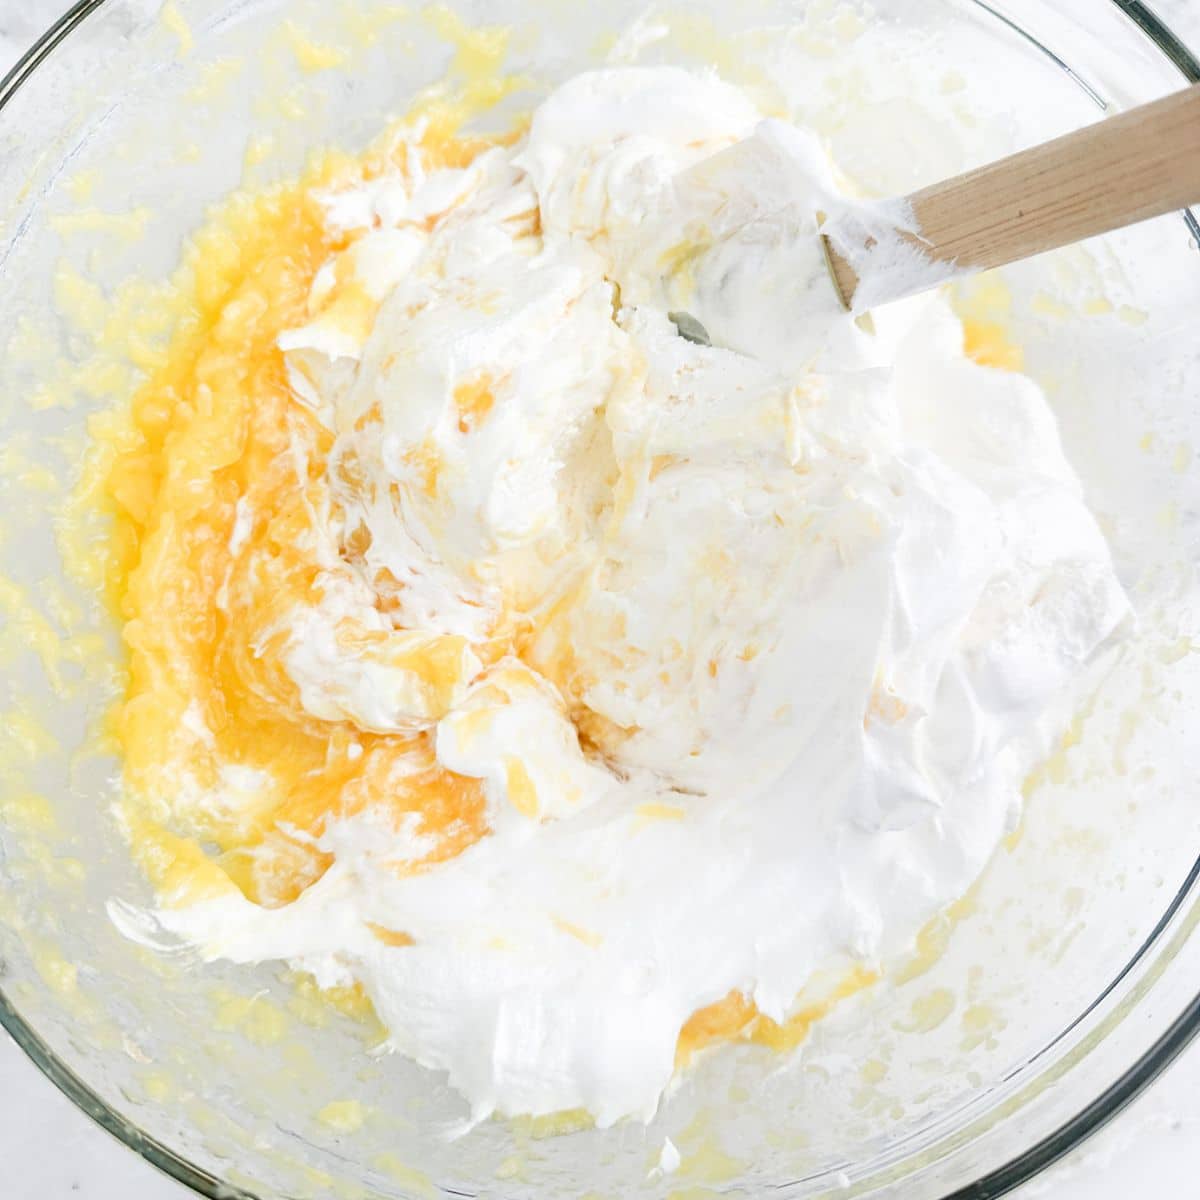 Bowl of Cool Whip and crushed pineapple.